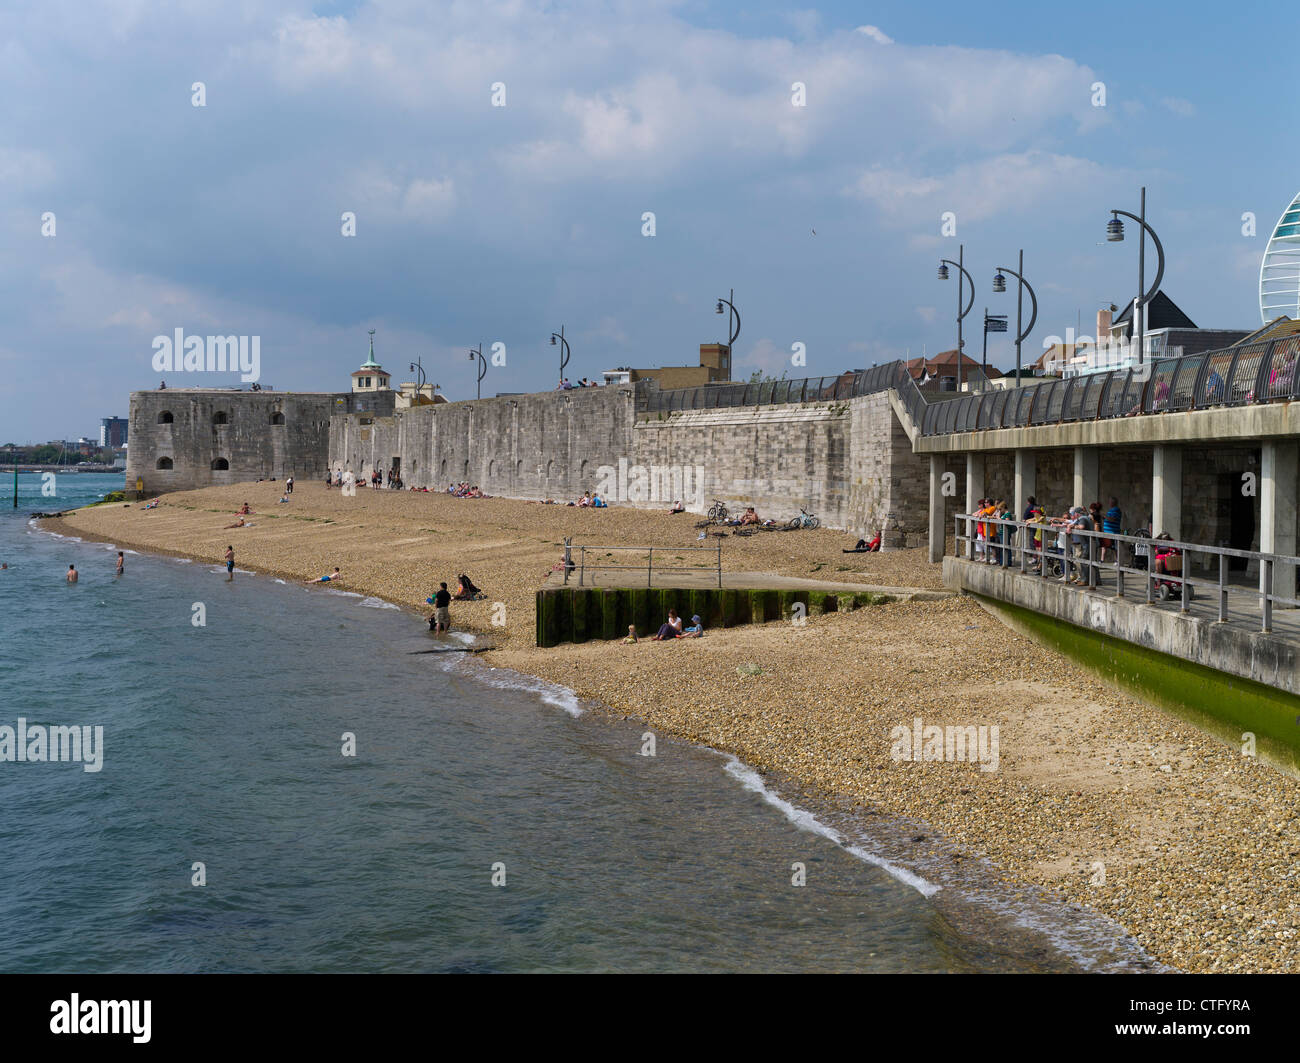 Dh vieux portsmouth HAMPSHIRE PORTSMOUTH Harbour Personnes beach et sea wall fortifications angleterre fort uk front Banque D'Images